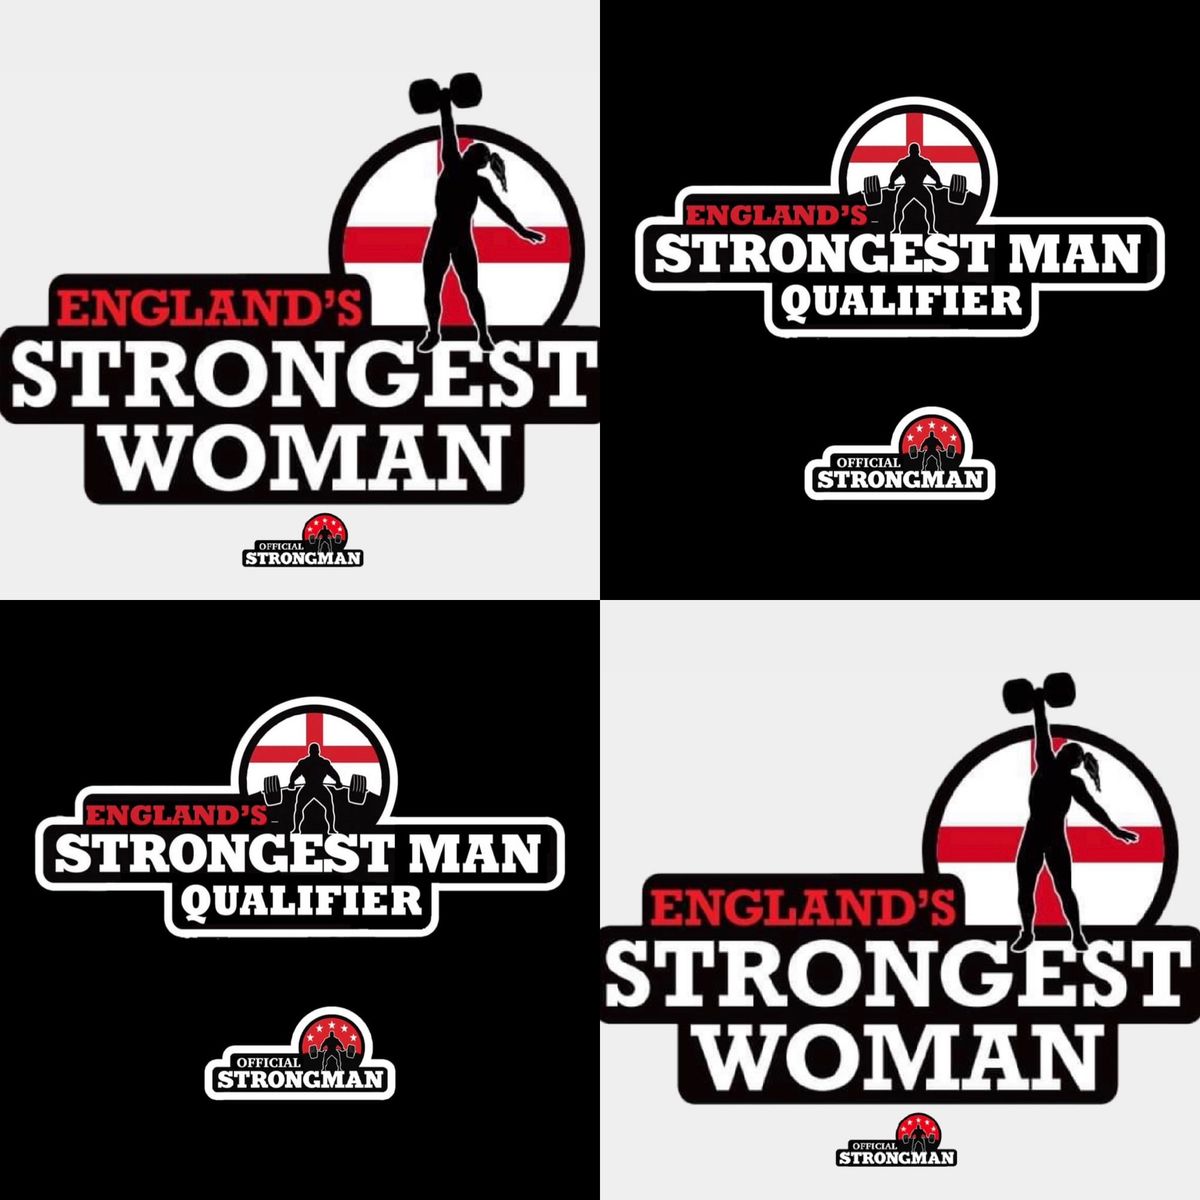 Official strongman Englands strongest man and woman.